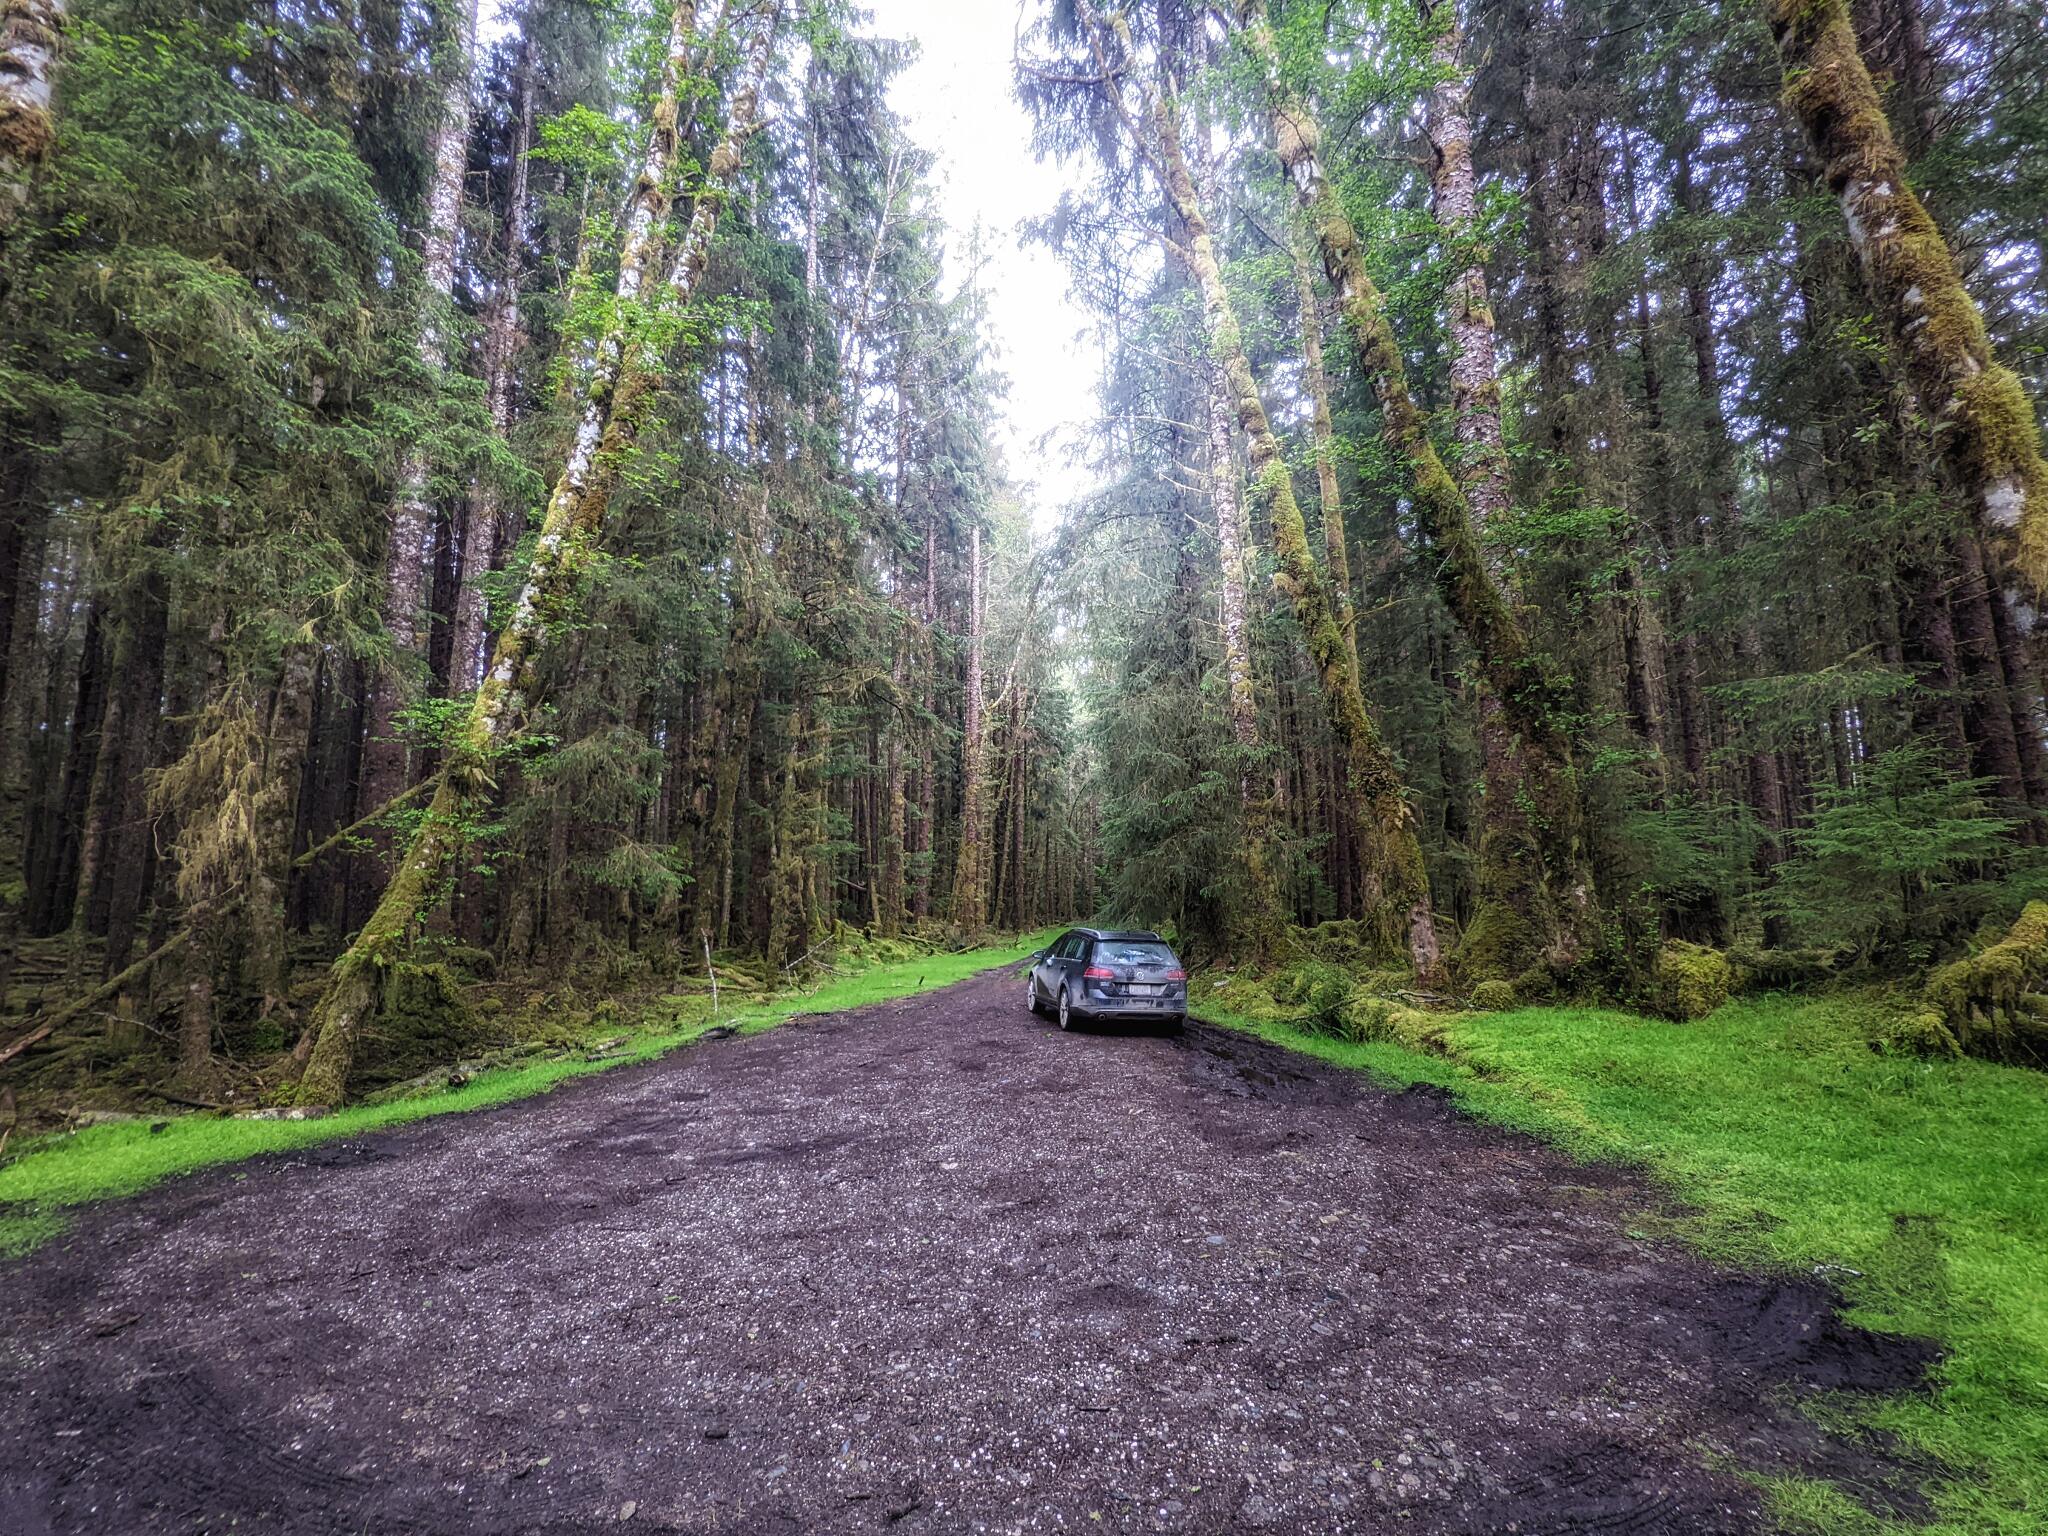 Here's my car parked at at trailhead in Haida Gwaii. (Used for 52 Frames 2022.23/Triangular Composition)